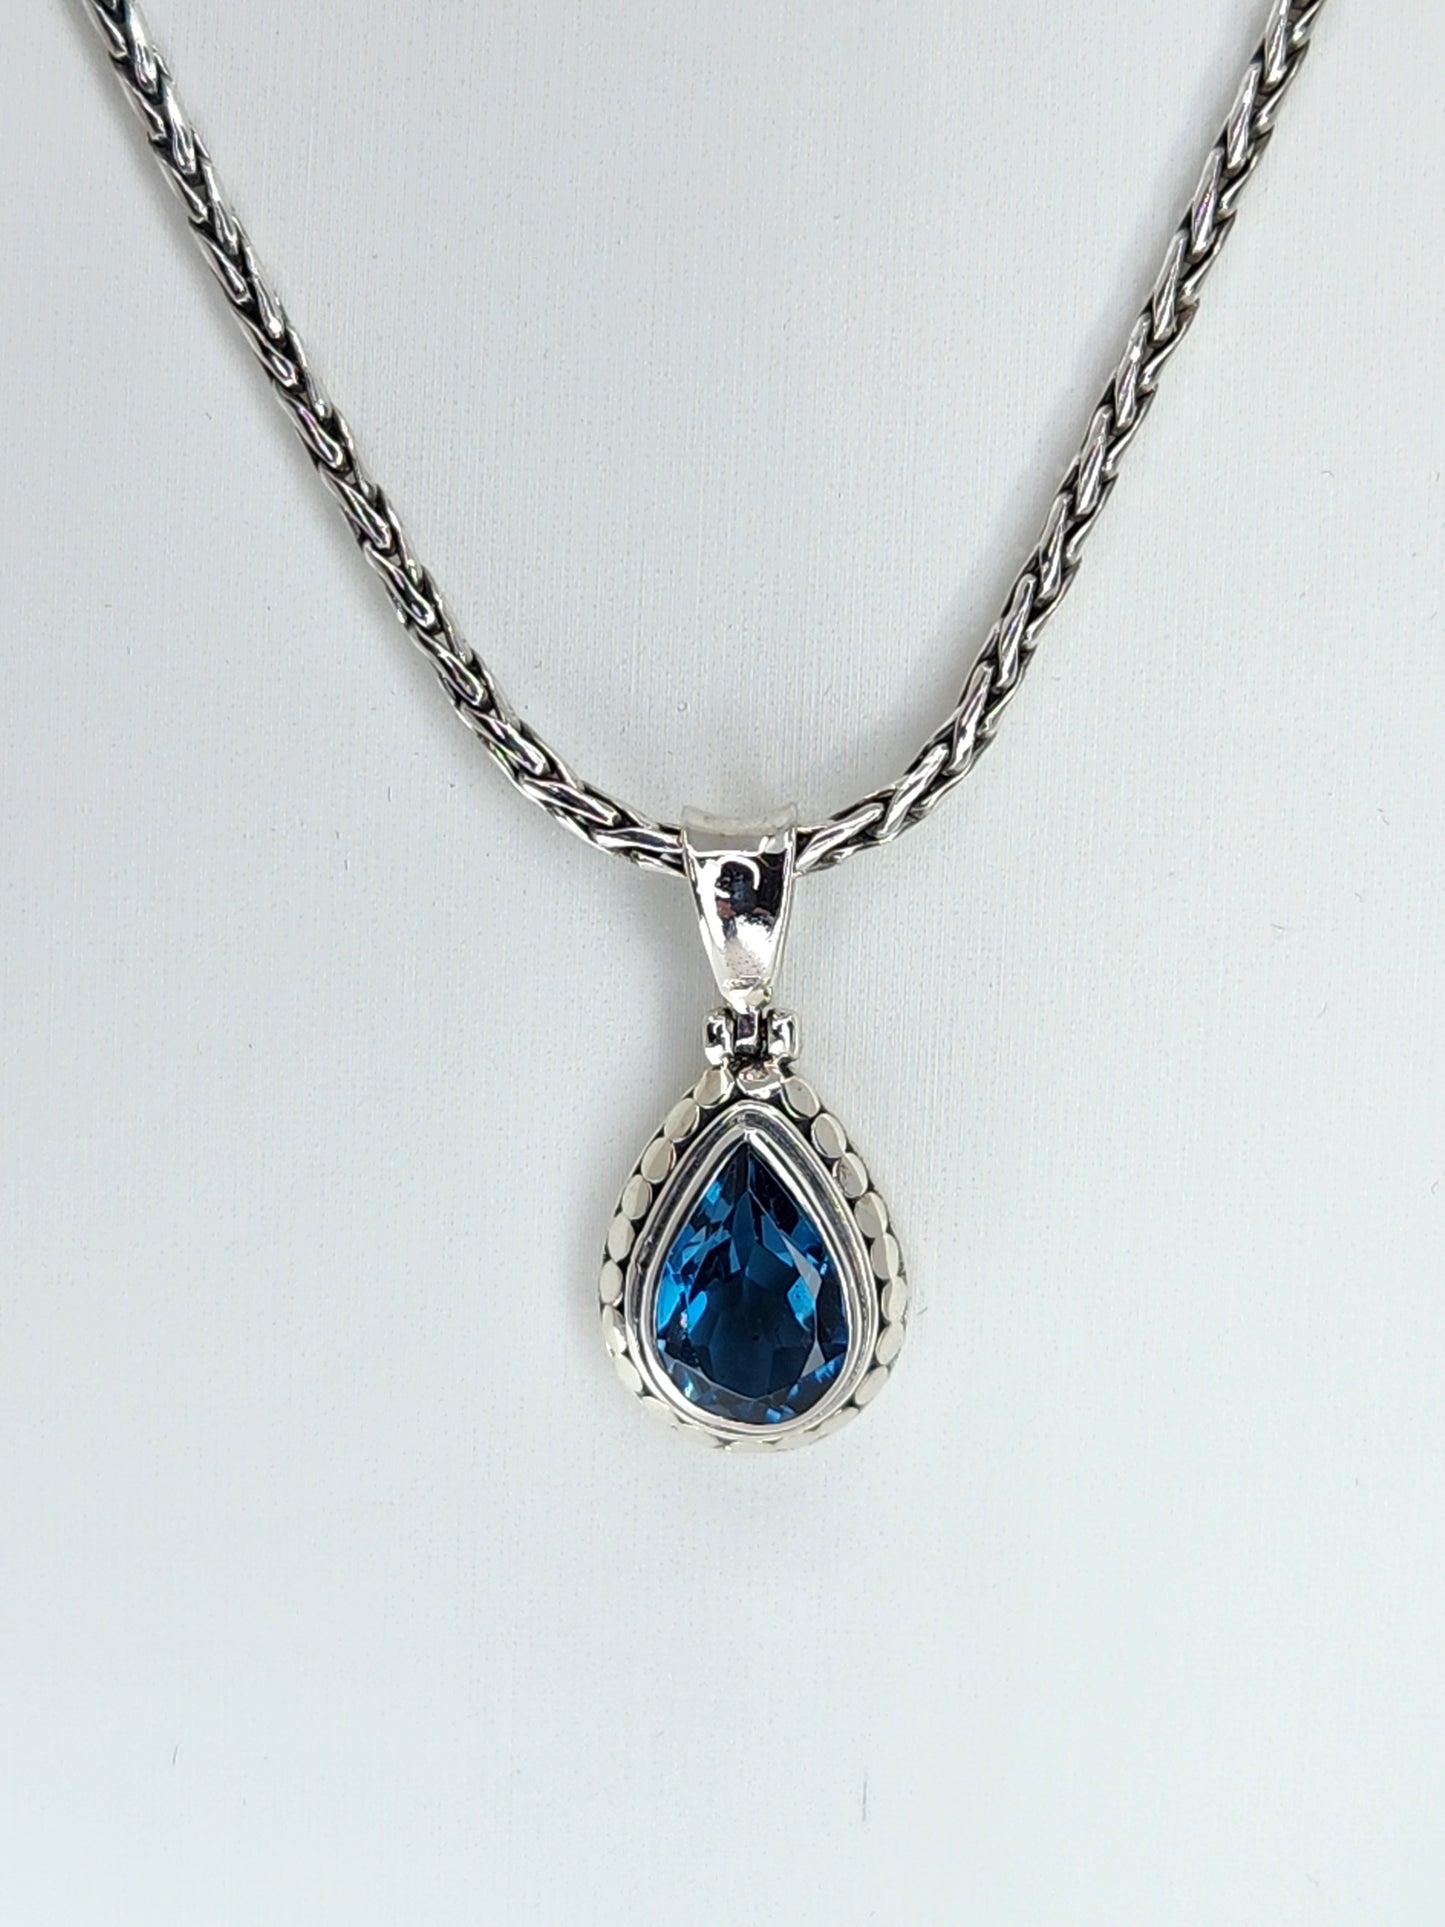 Janice Carson - London Blue Topaz Small Teardrop Necklace With Sterling Silver Chain